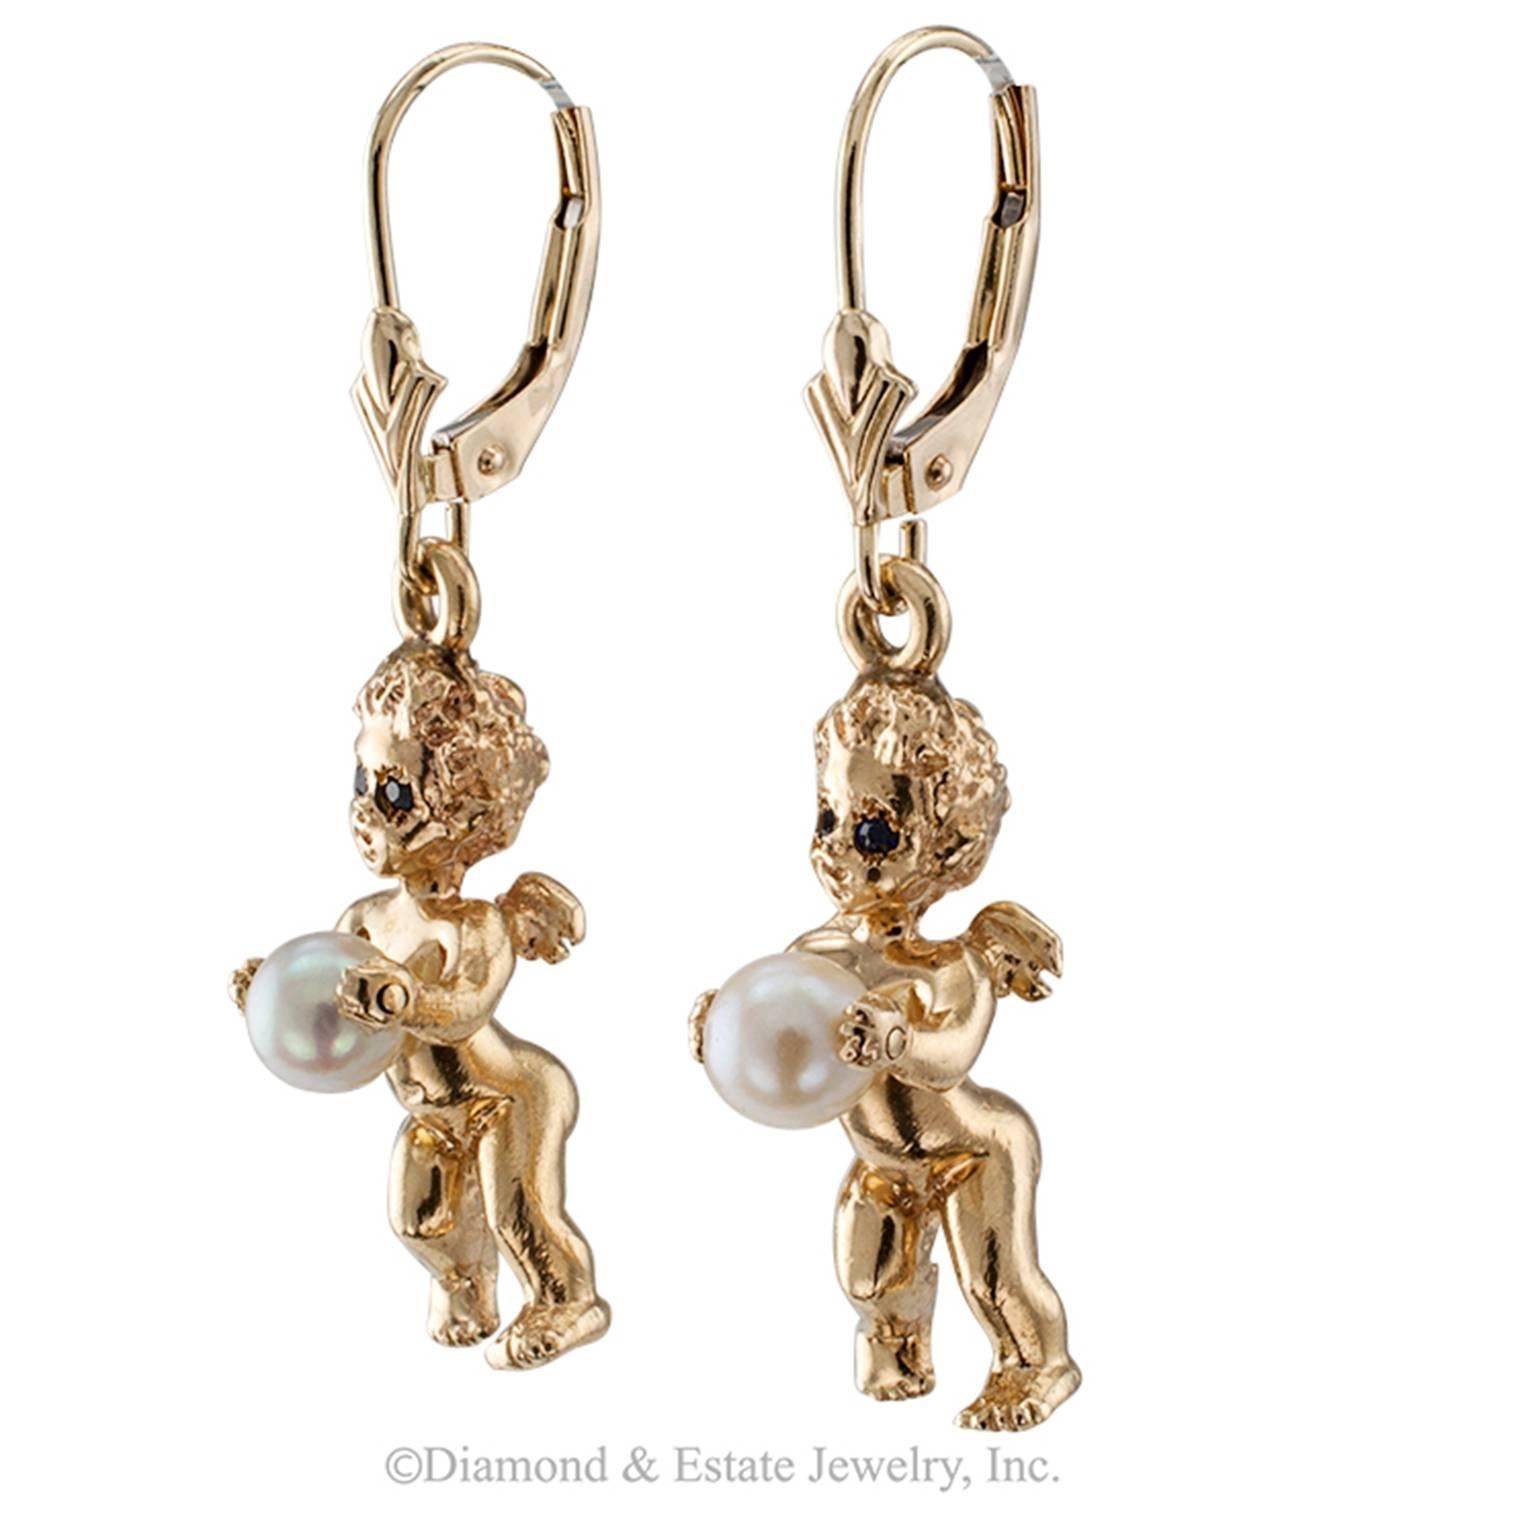 Modern Gold and Cultured Pearl Cherub Earrings Attributed to Ruser